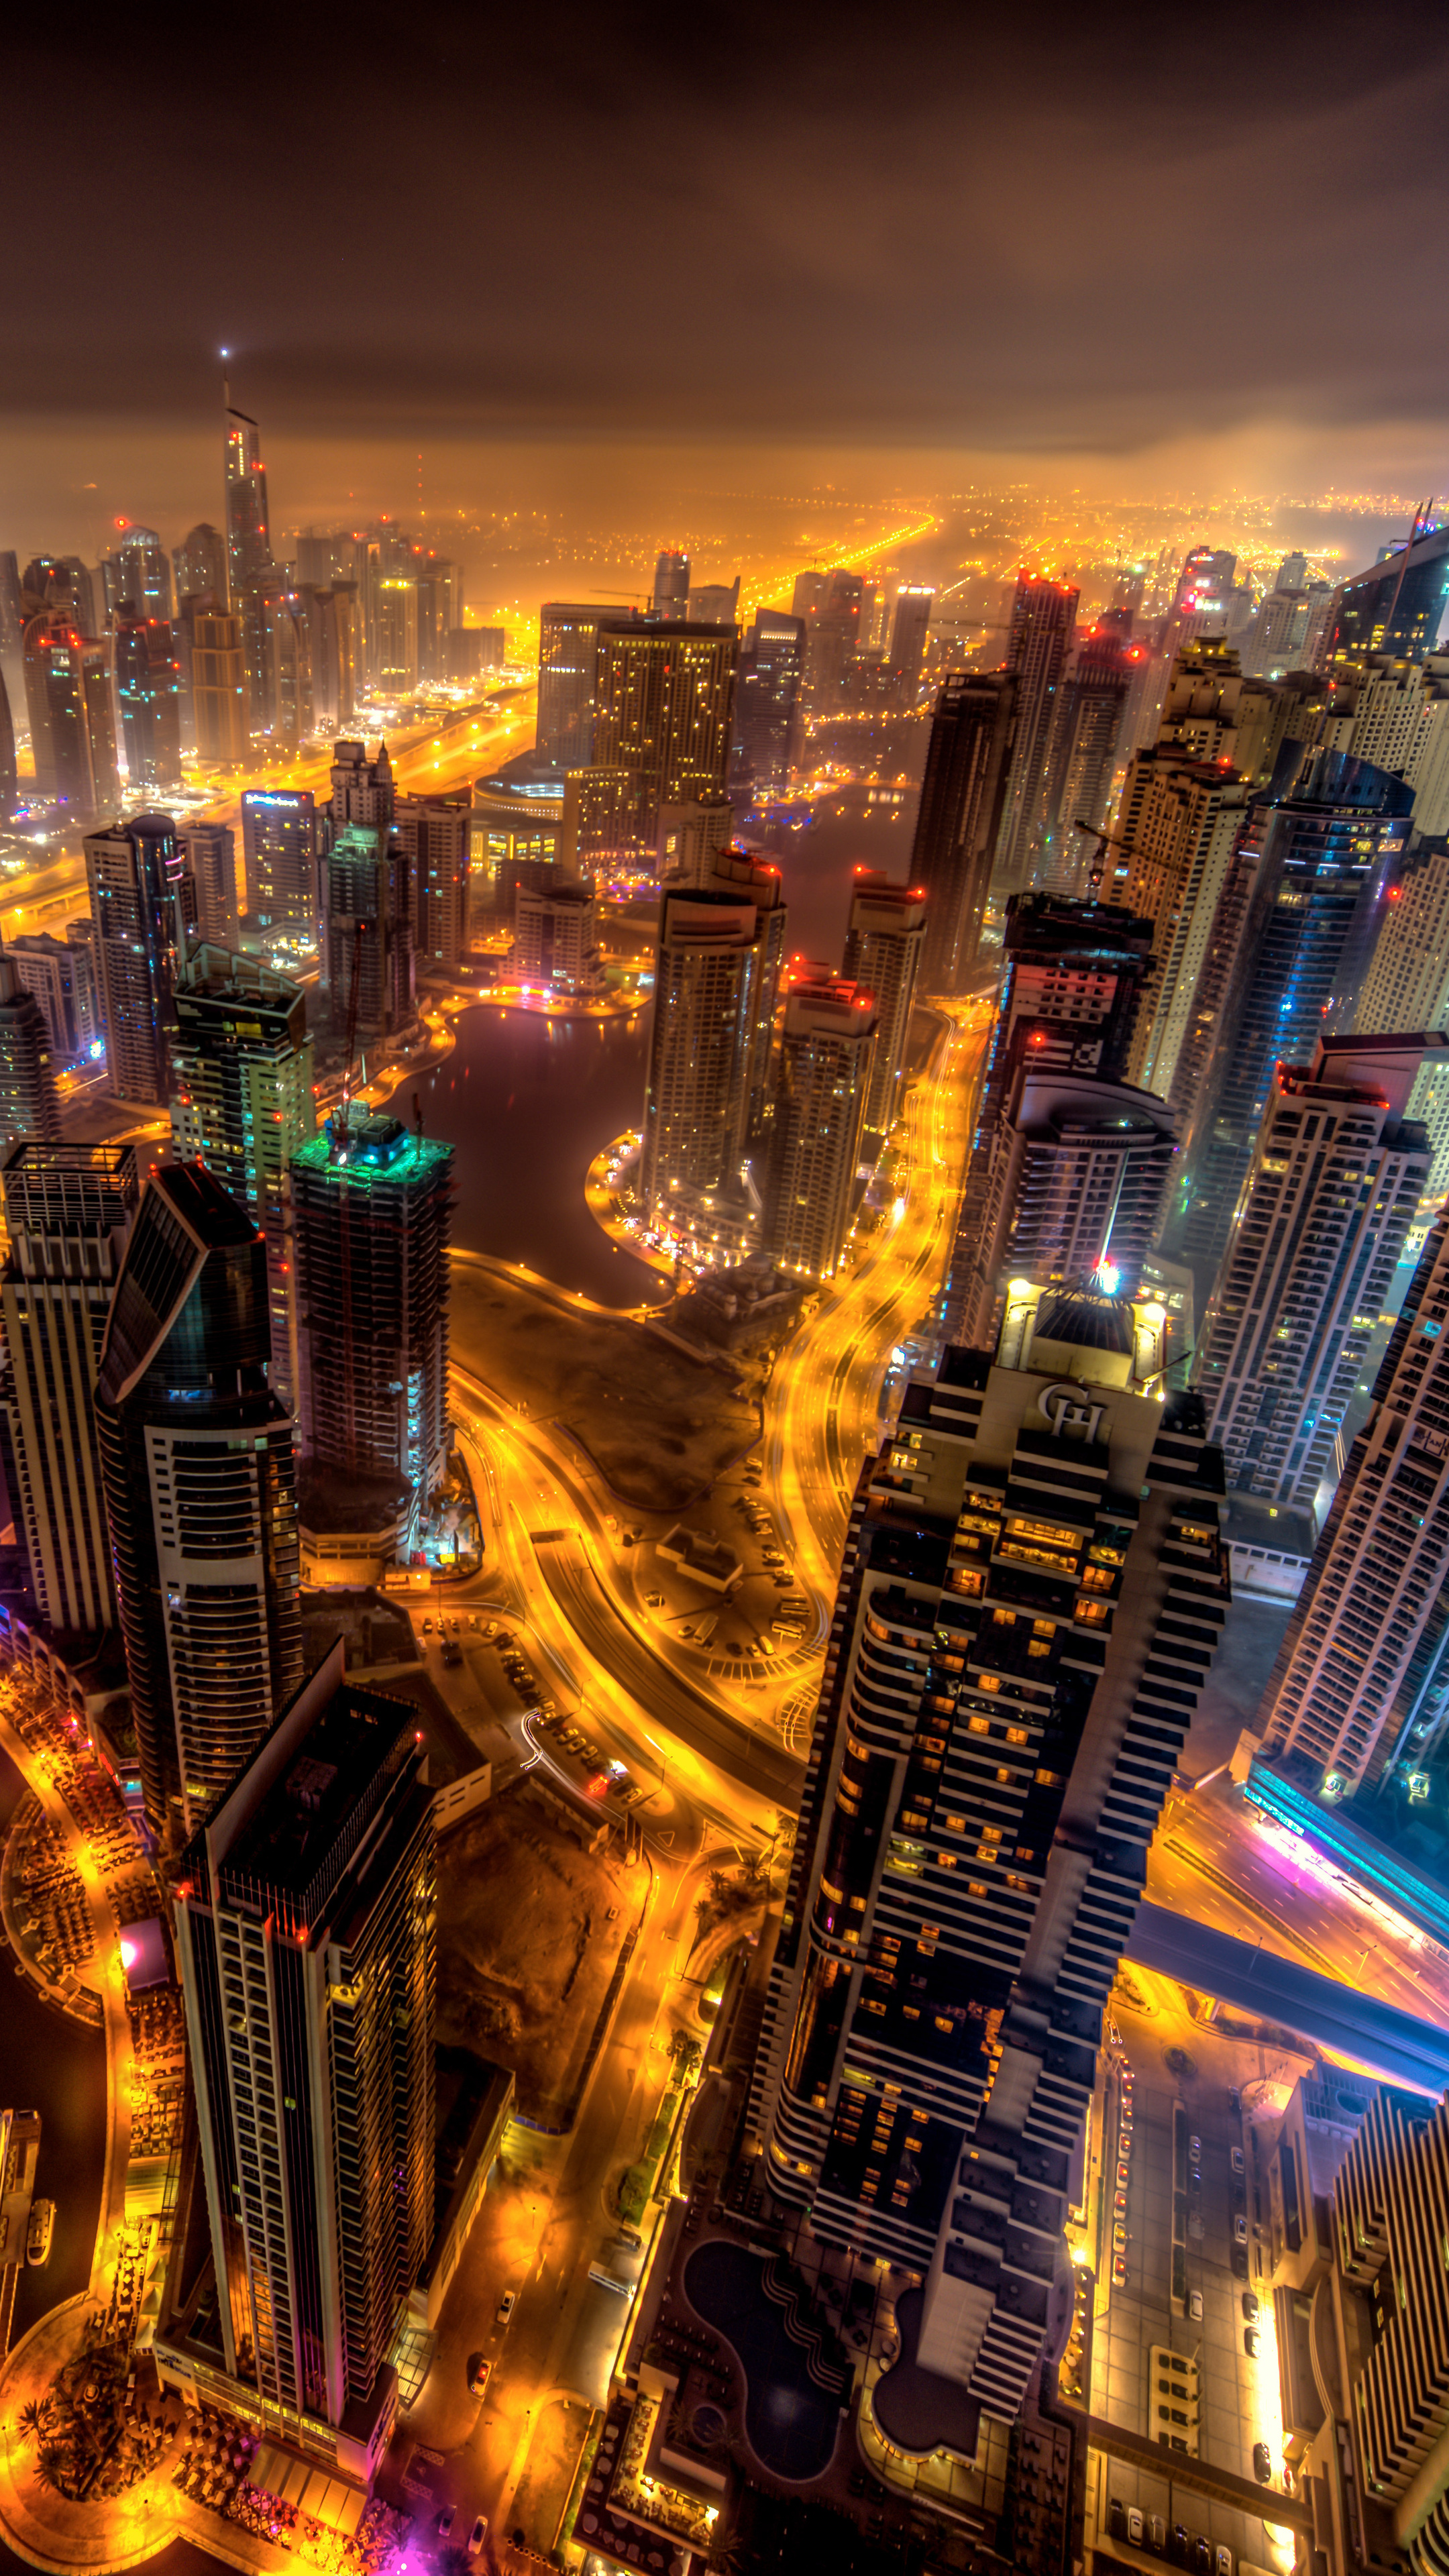 Dubai: The city center, A string of skyscrapers lining Sheikh Zayed Road, Night lights. 2160x3840 4K Wallpaper.